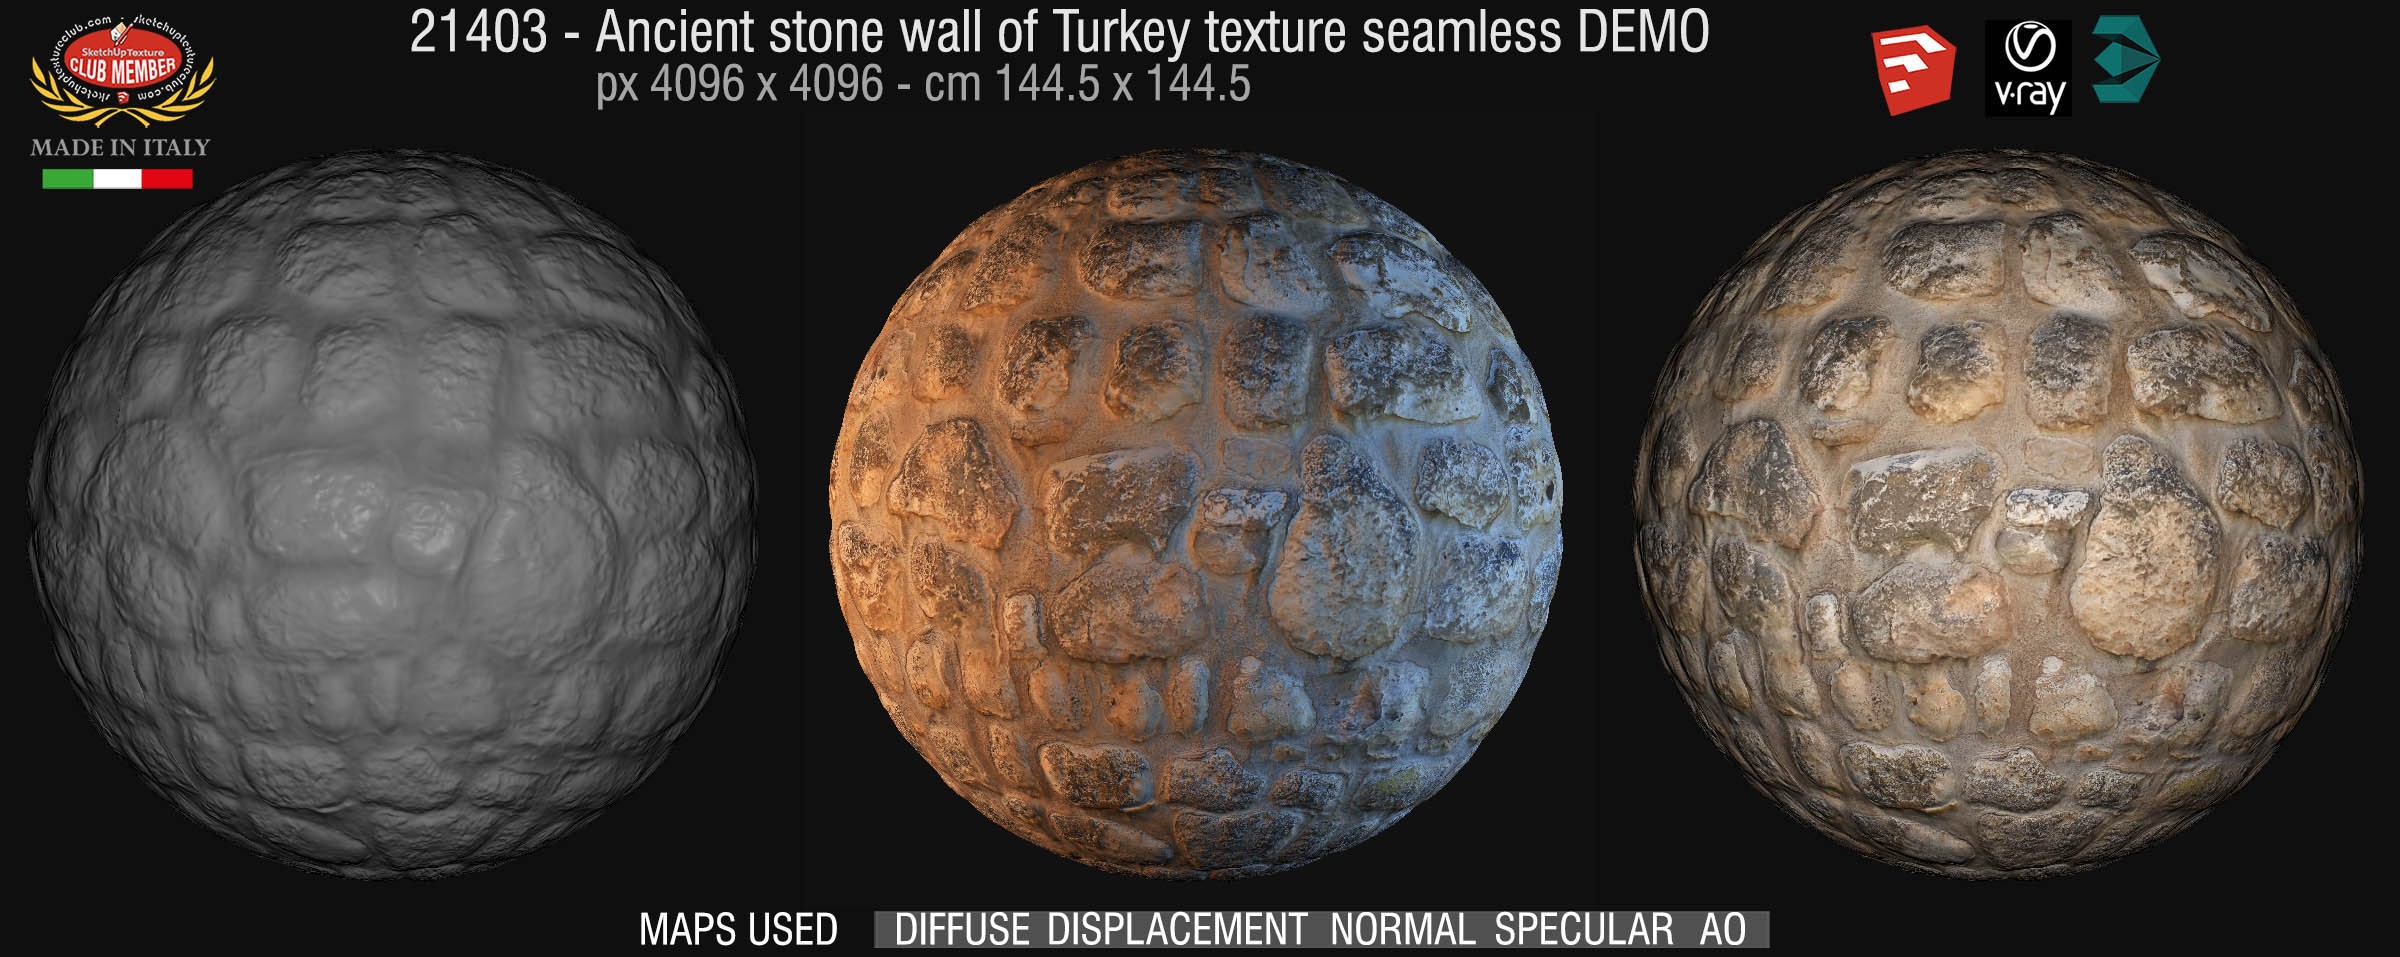 21403 Ancient stone wall of Turkey texture seamless + maps DEMO